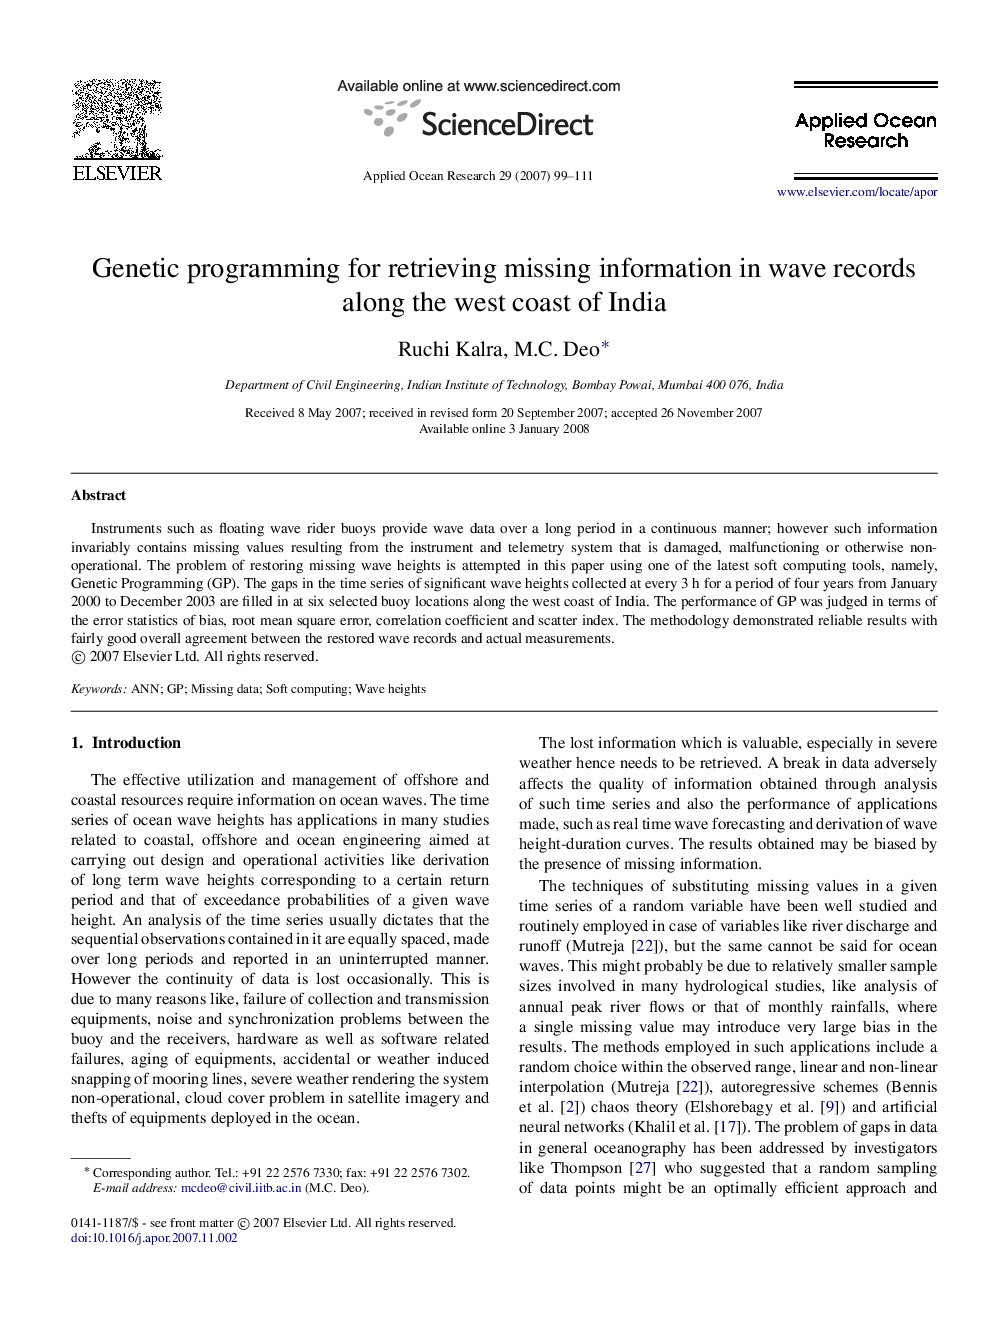 Genetic programming for retrieving missing information in wave records along the west coast of India